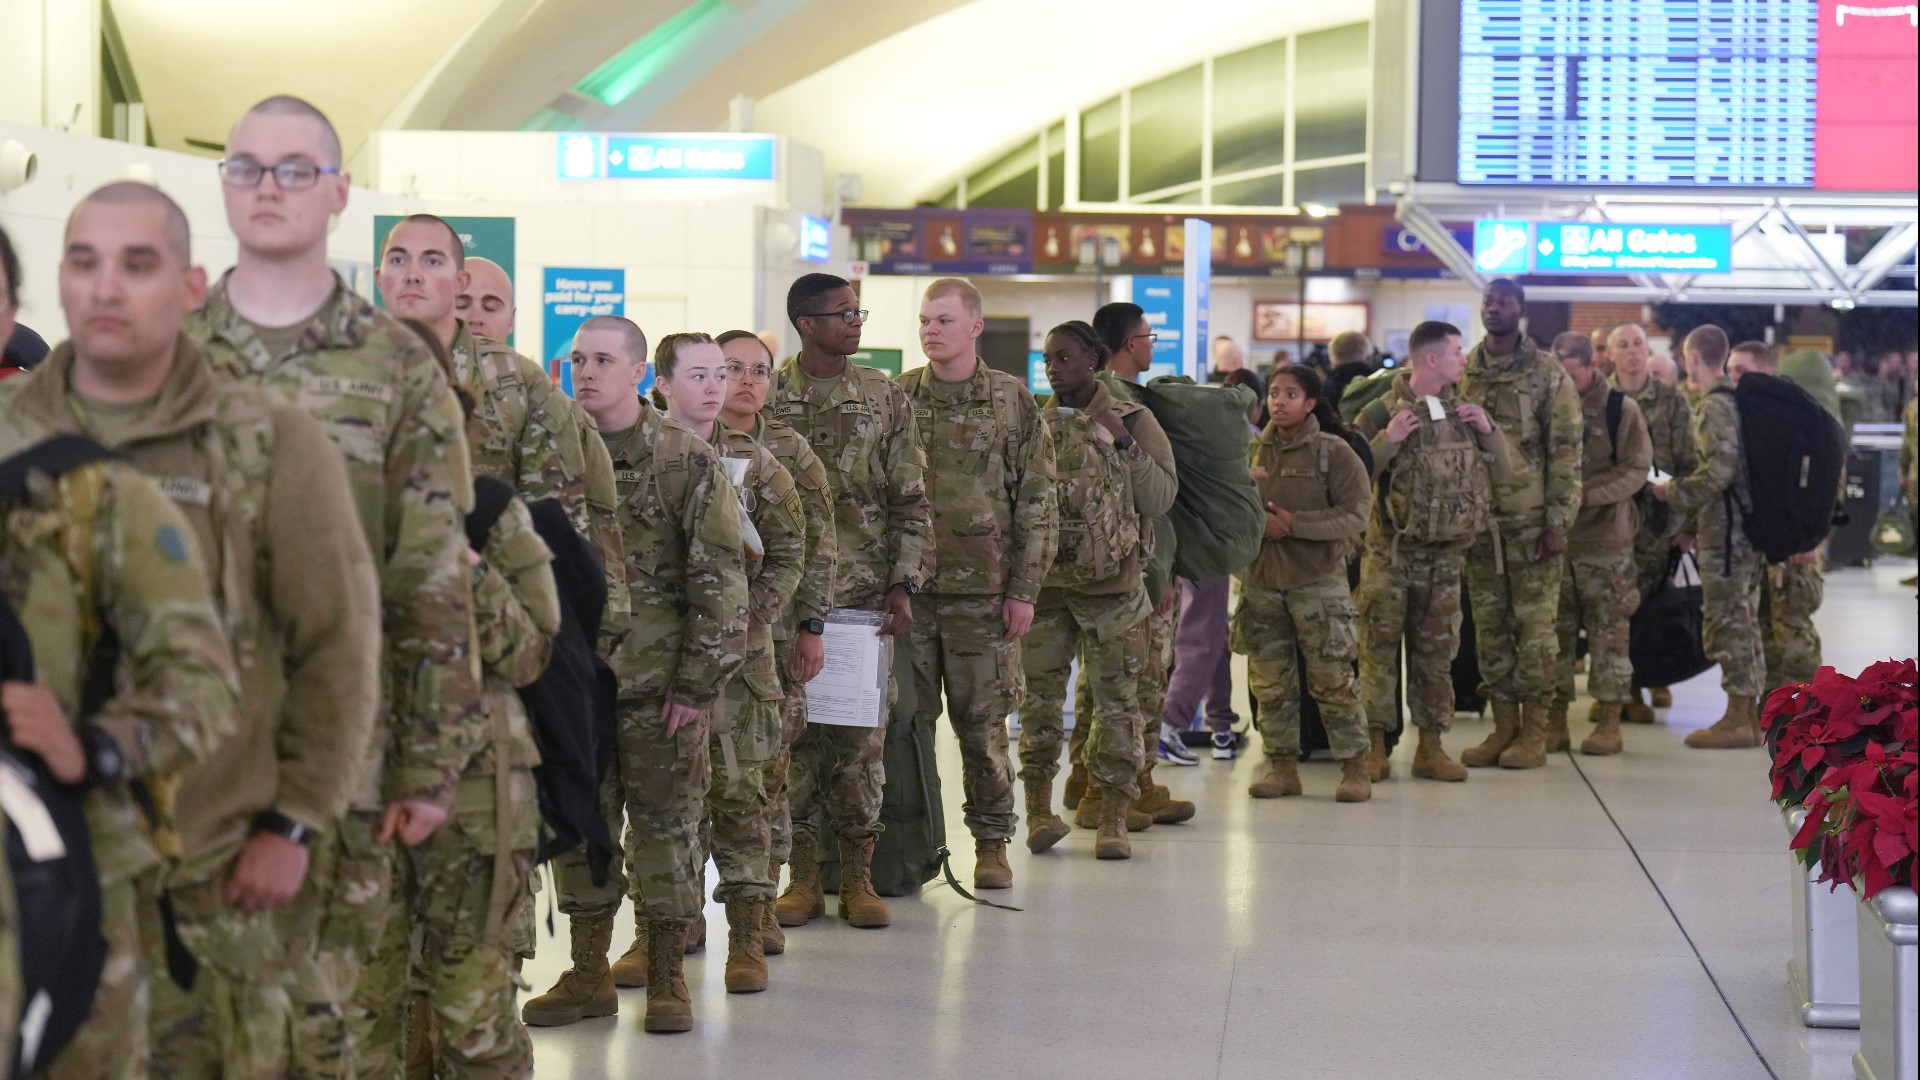 St. Louis Lambert International Airport was a sea of green Tuesday, as USO Missouri hosted its annual "Green Day" event.